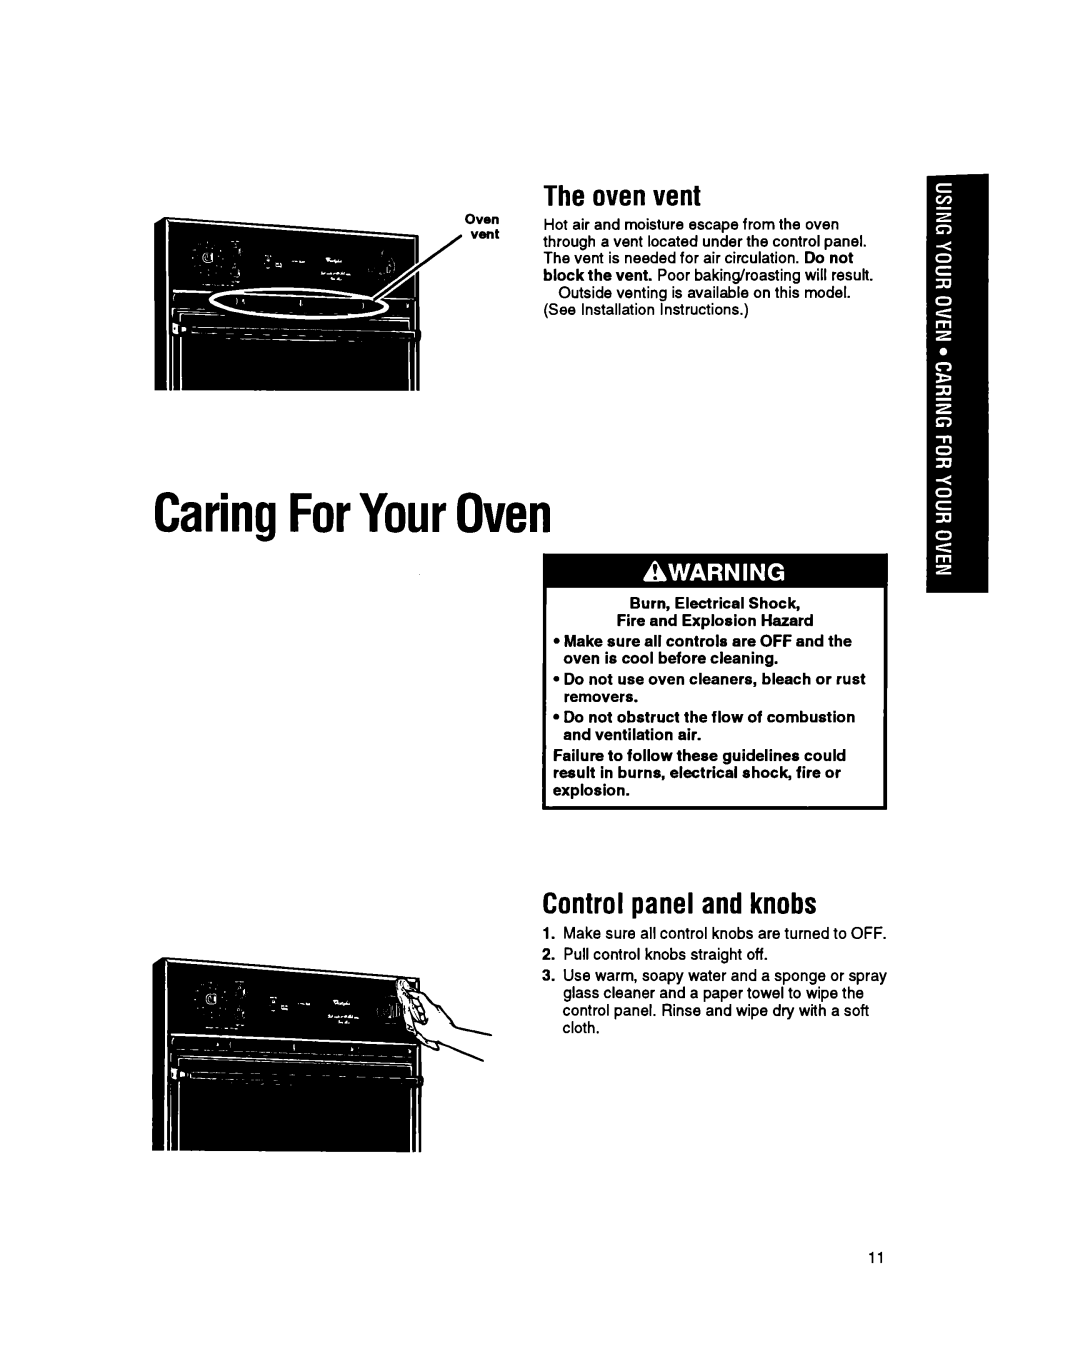 Whirlpool SBl3OPER manual CaringForYourOven, Theovenvent, Controlpanel and knobs 